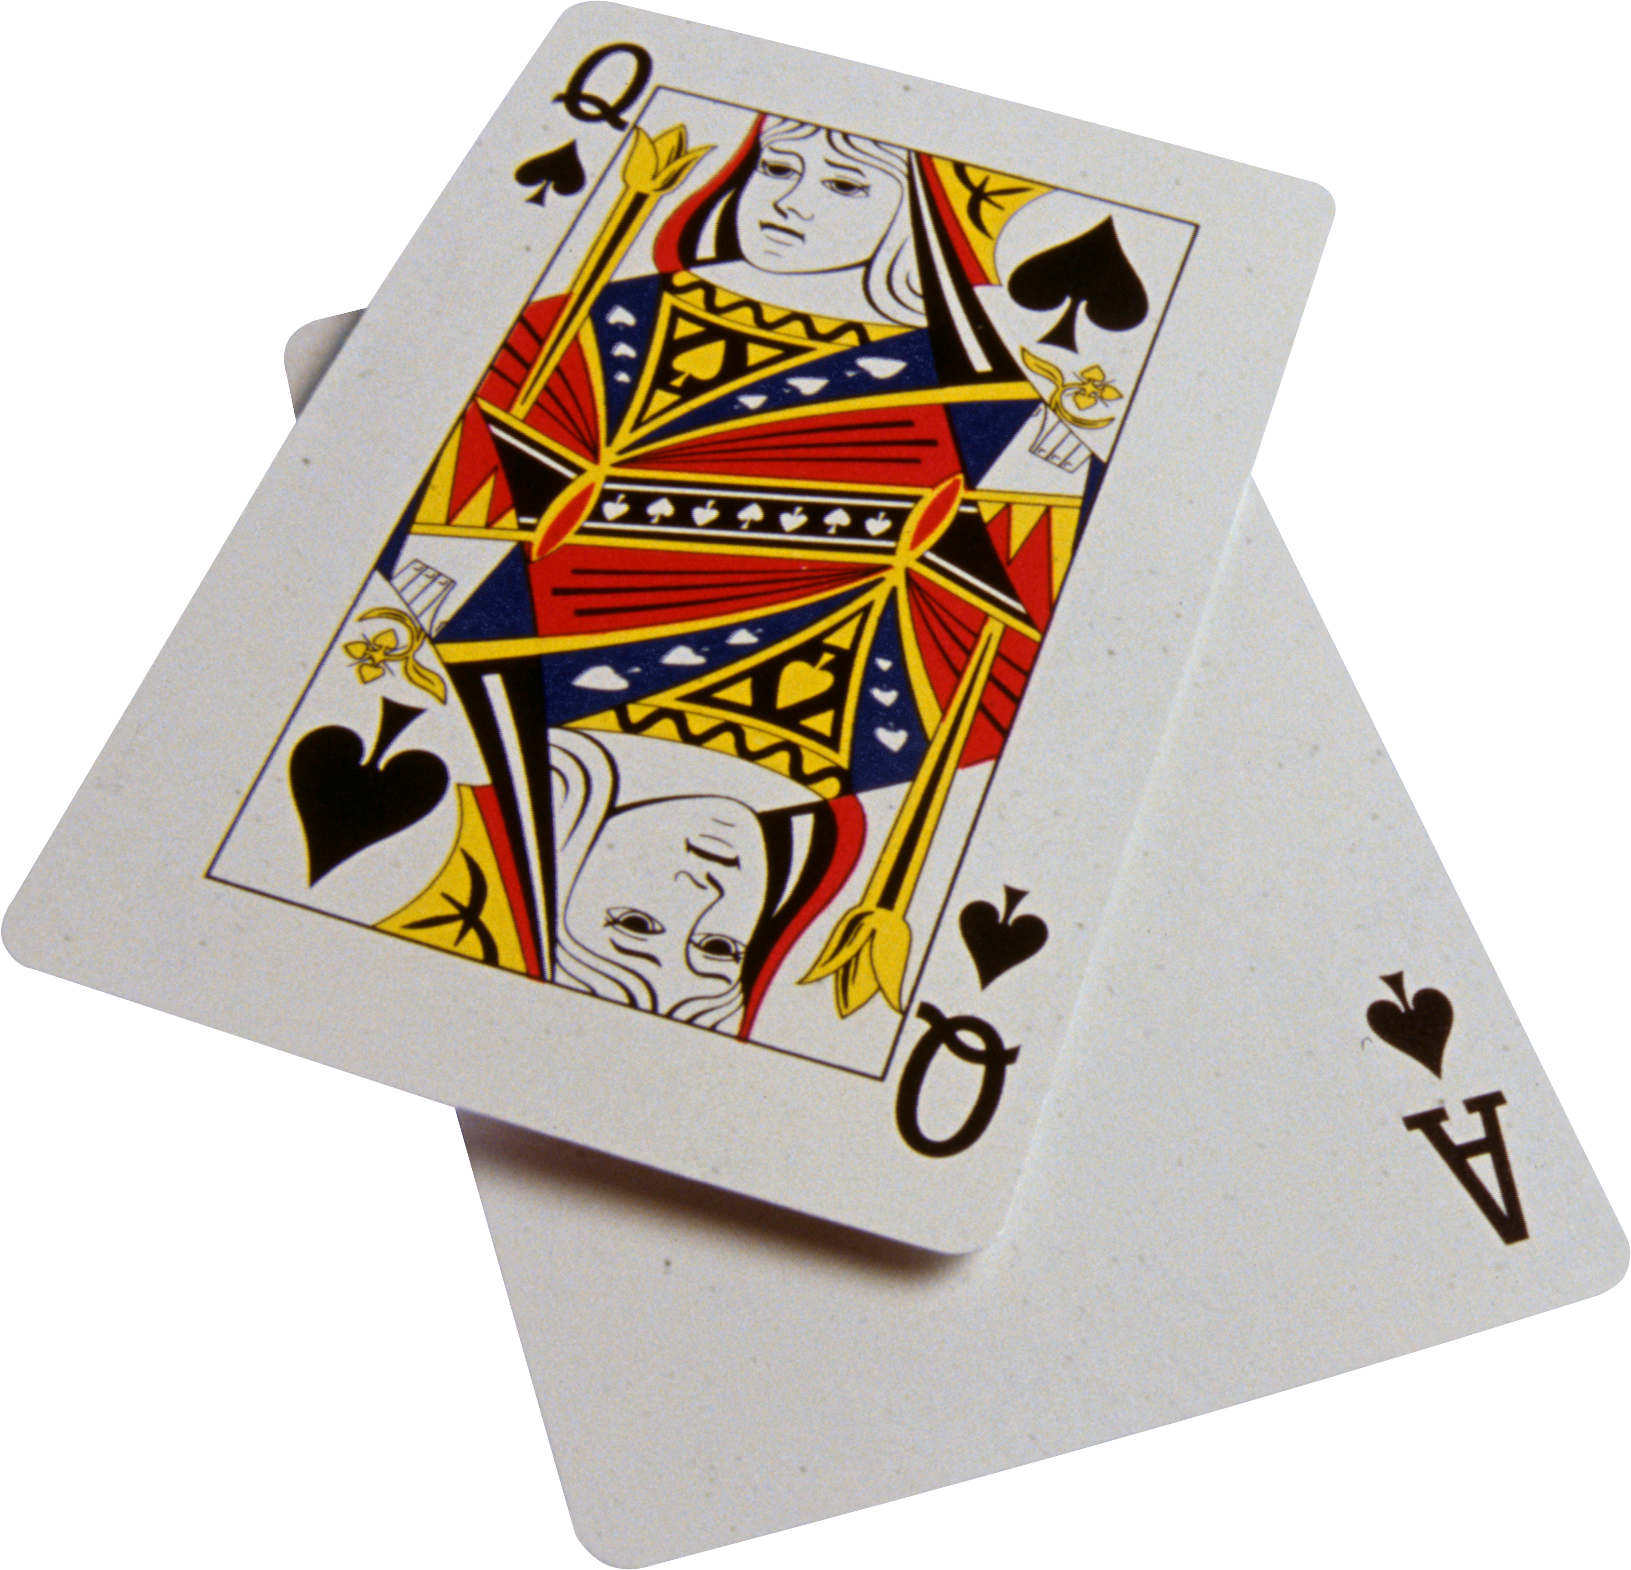 Ace Playing Card PNG Transparent Image